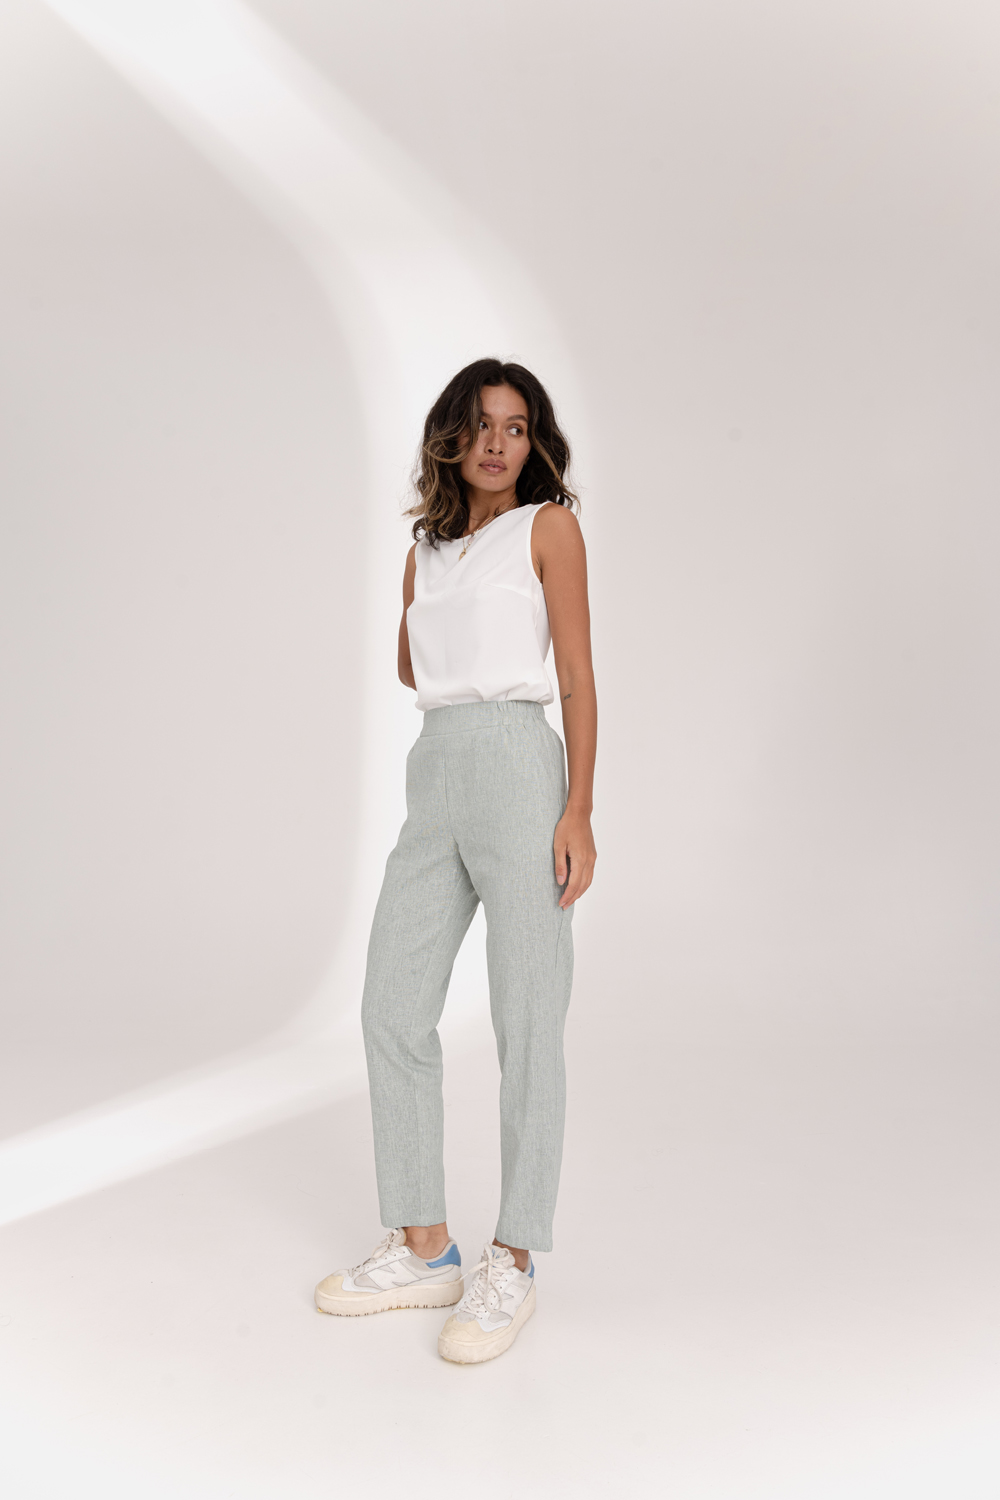 Mint linen trousers with elastic waistband